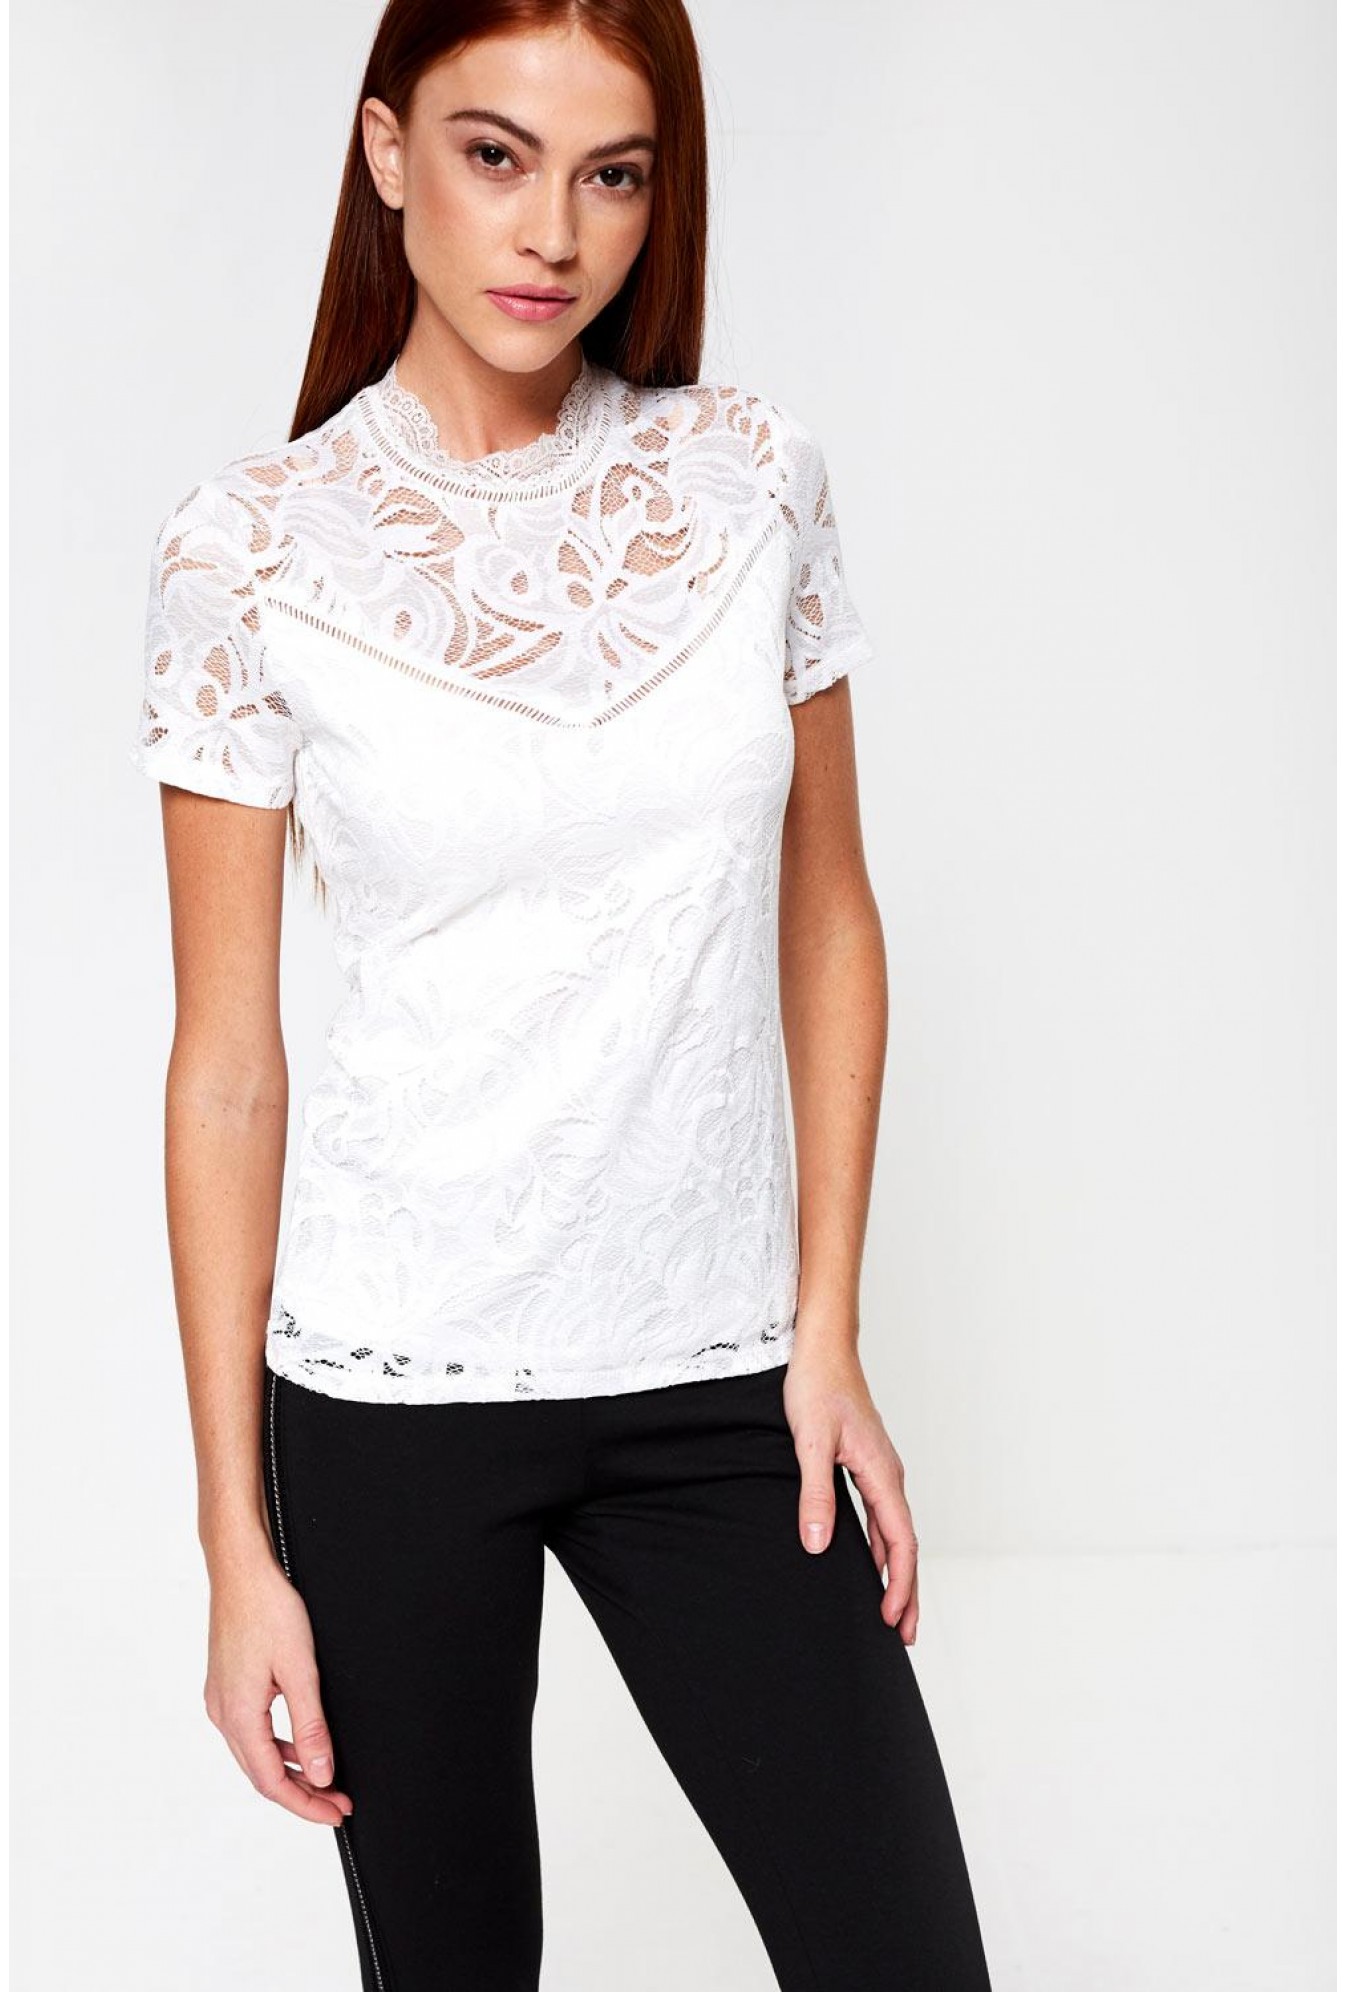 Vila Stasia Short Sleeve Lace Top in White | iCLOTHING